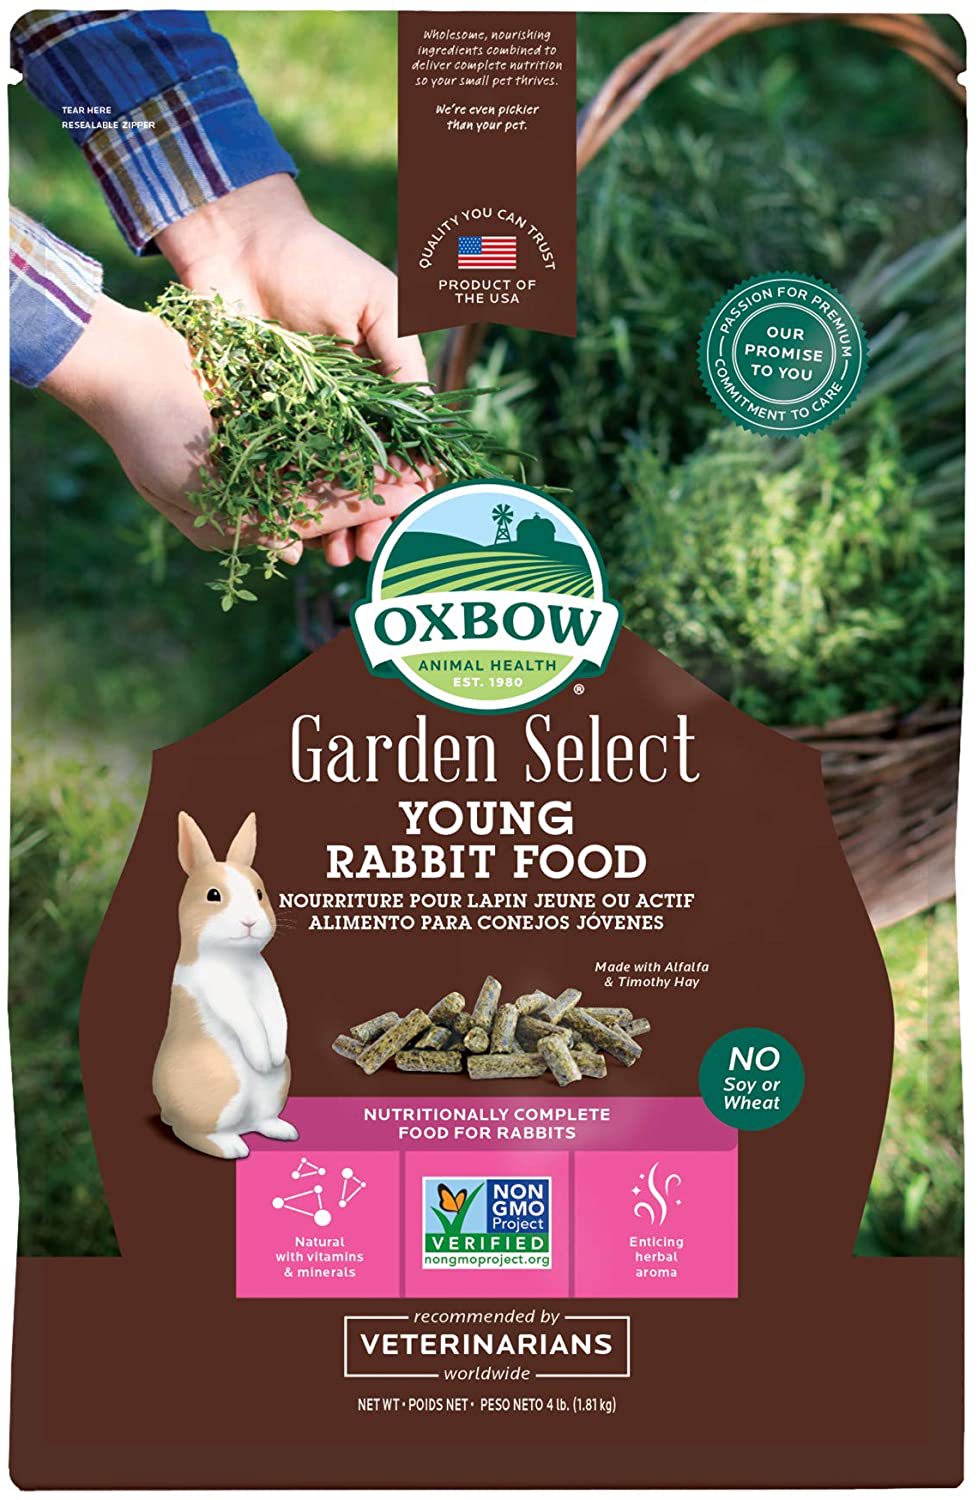 Oxbow Animal Health Garden Select Young Rabbit Food, Garden-Inspired Recipe for Young Rabbits, No Soy or Wheat, Non-Gmo, Made in the USA, 4 Pound Bag